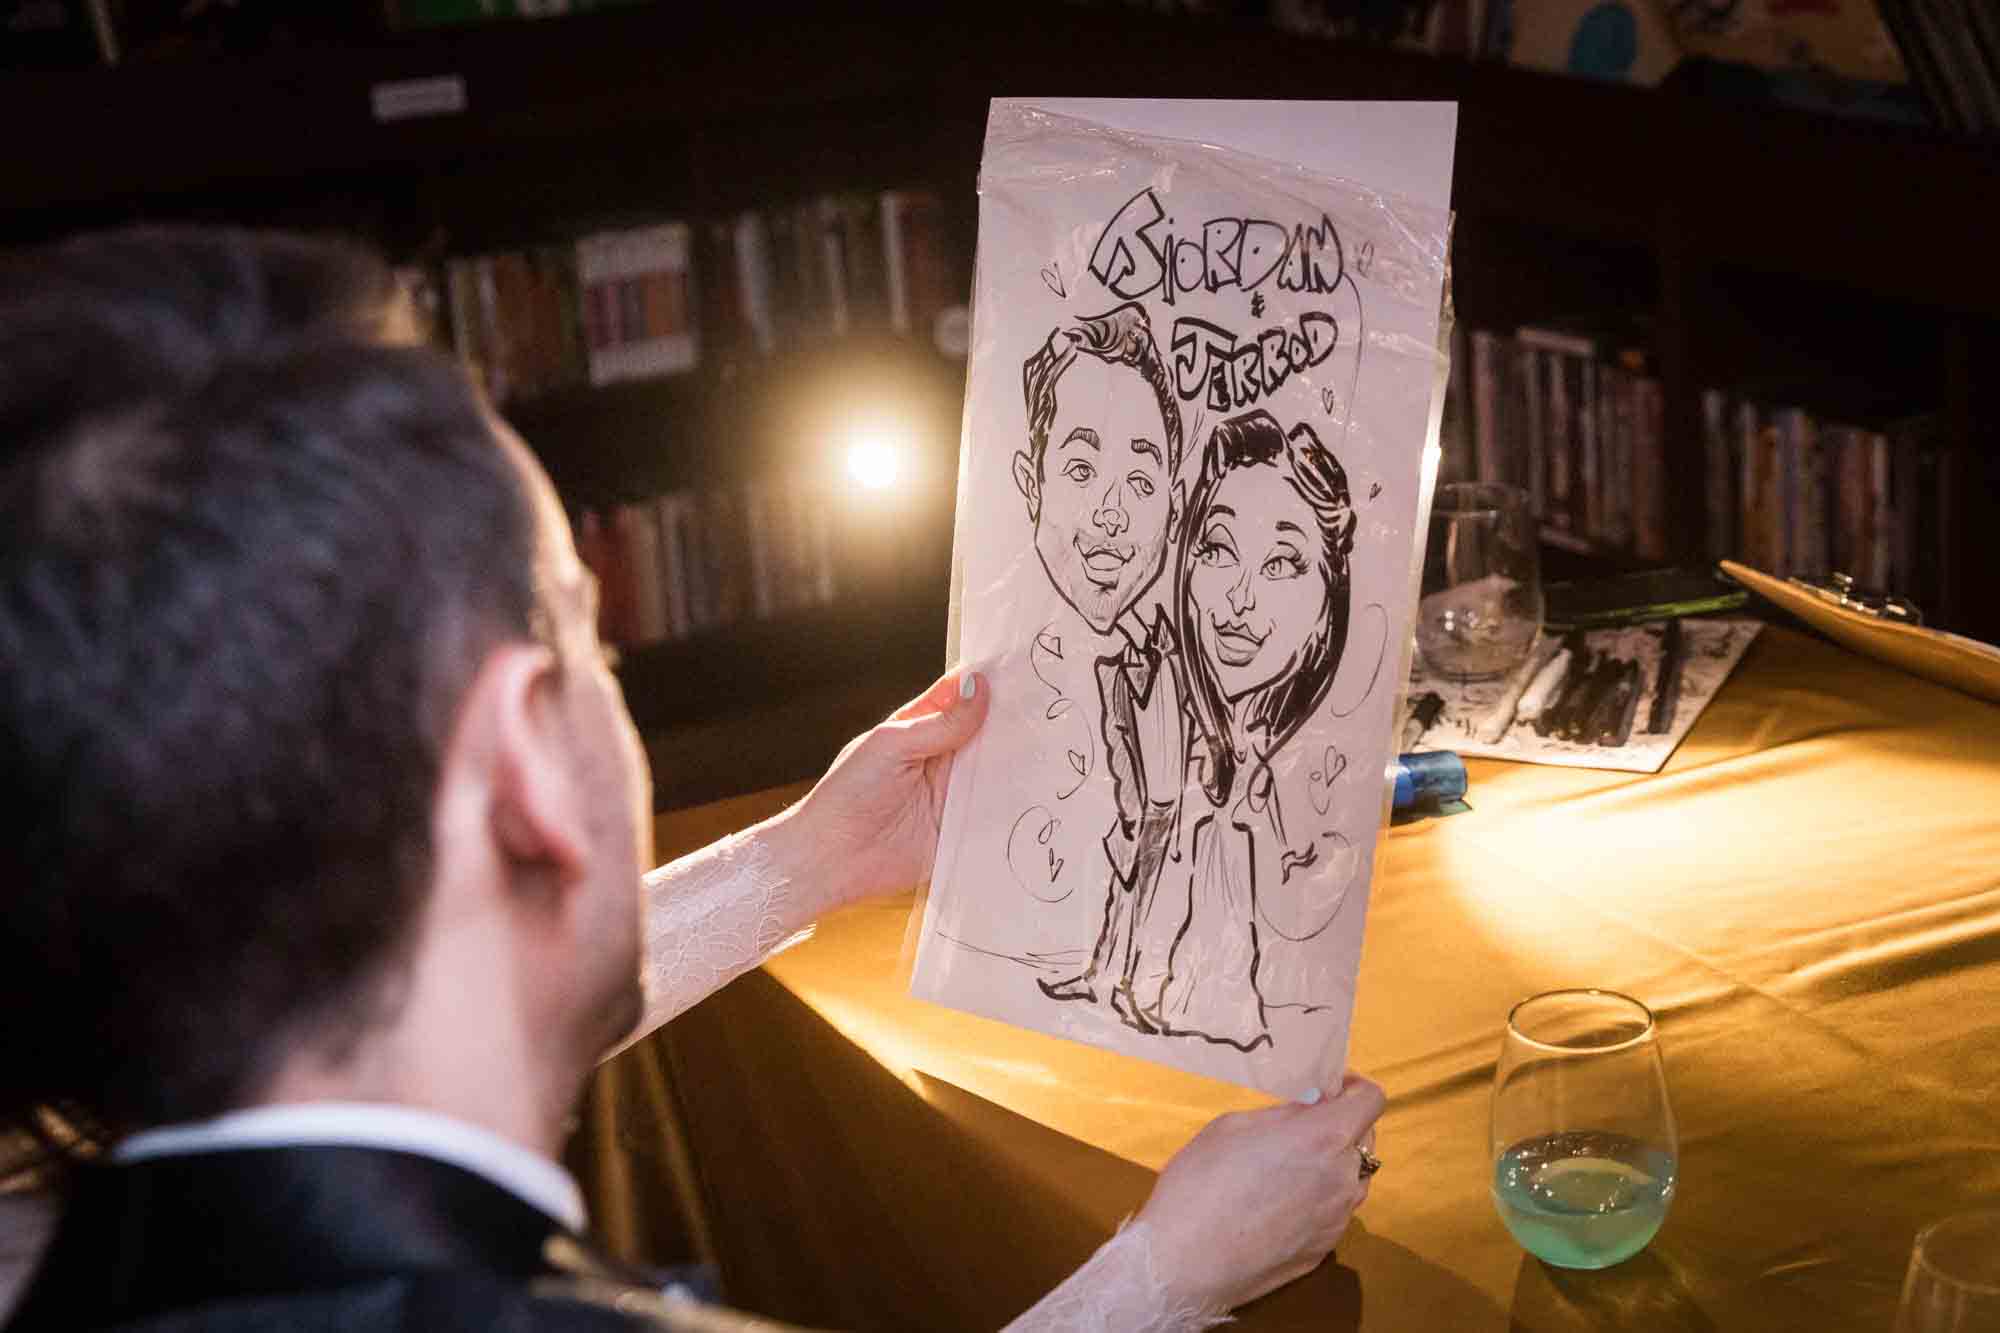 Couple looking at caricature drawing on paper